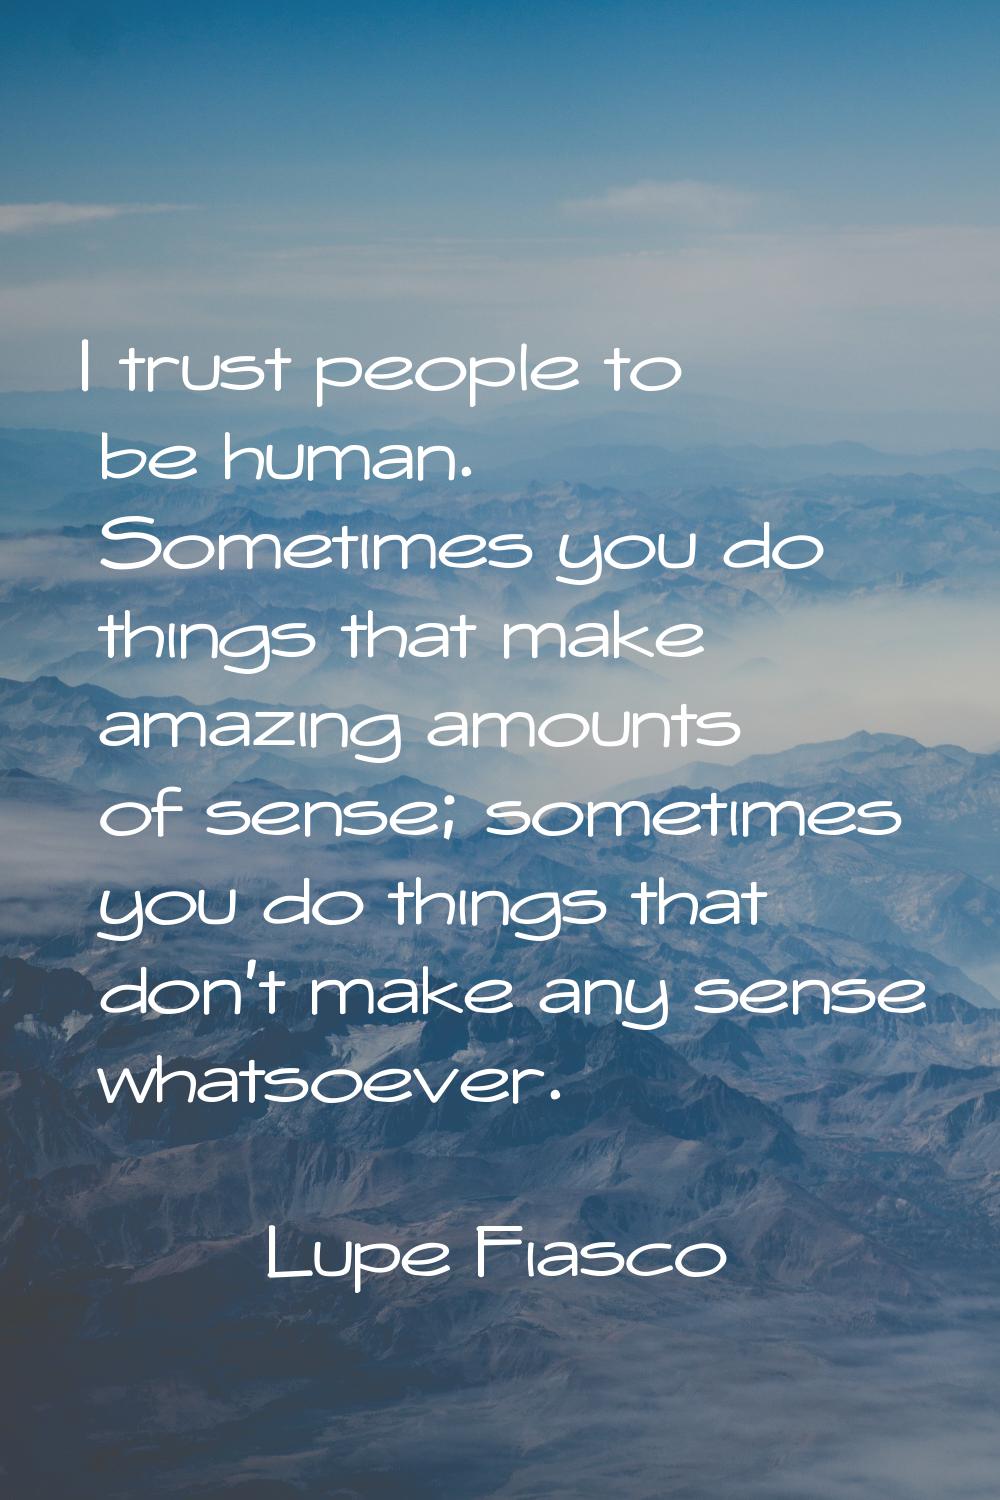 I trust people to be human. Sometimes you do things that make amazing amounts of sense; sometimes y